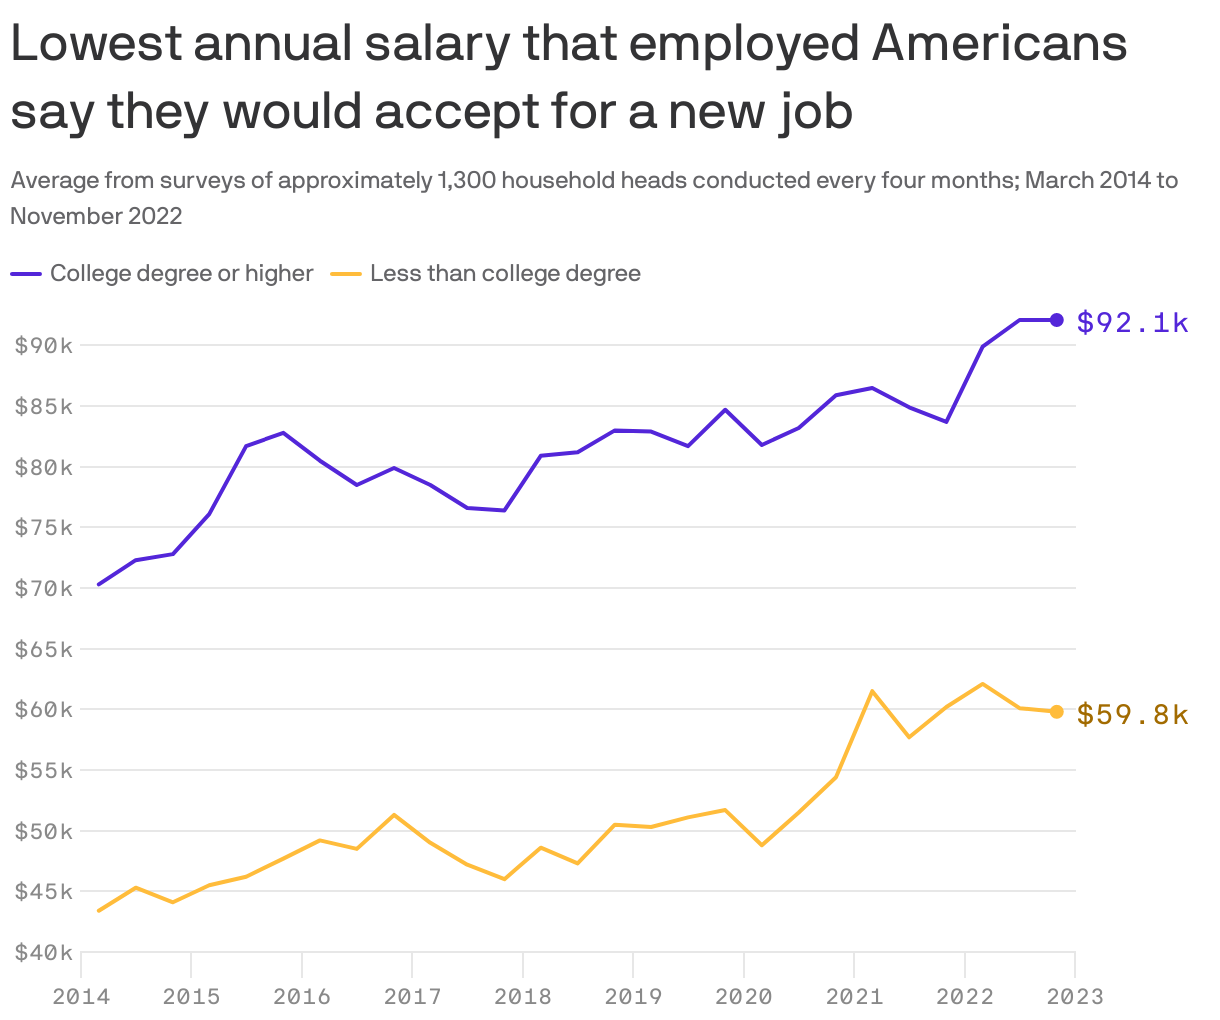 Lowest annual salary that employed Americans say they would accept for a new job